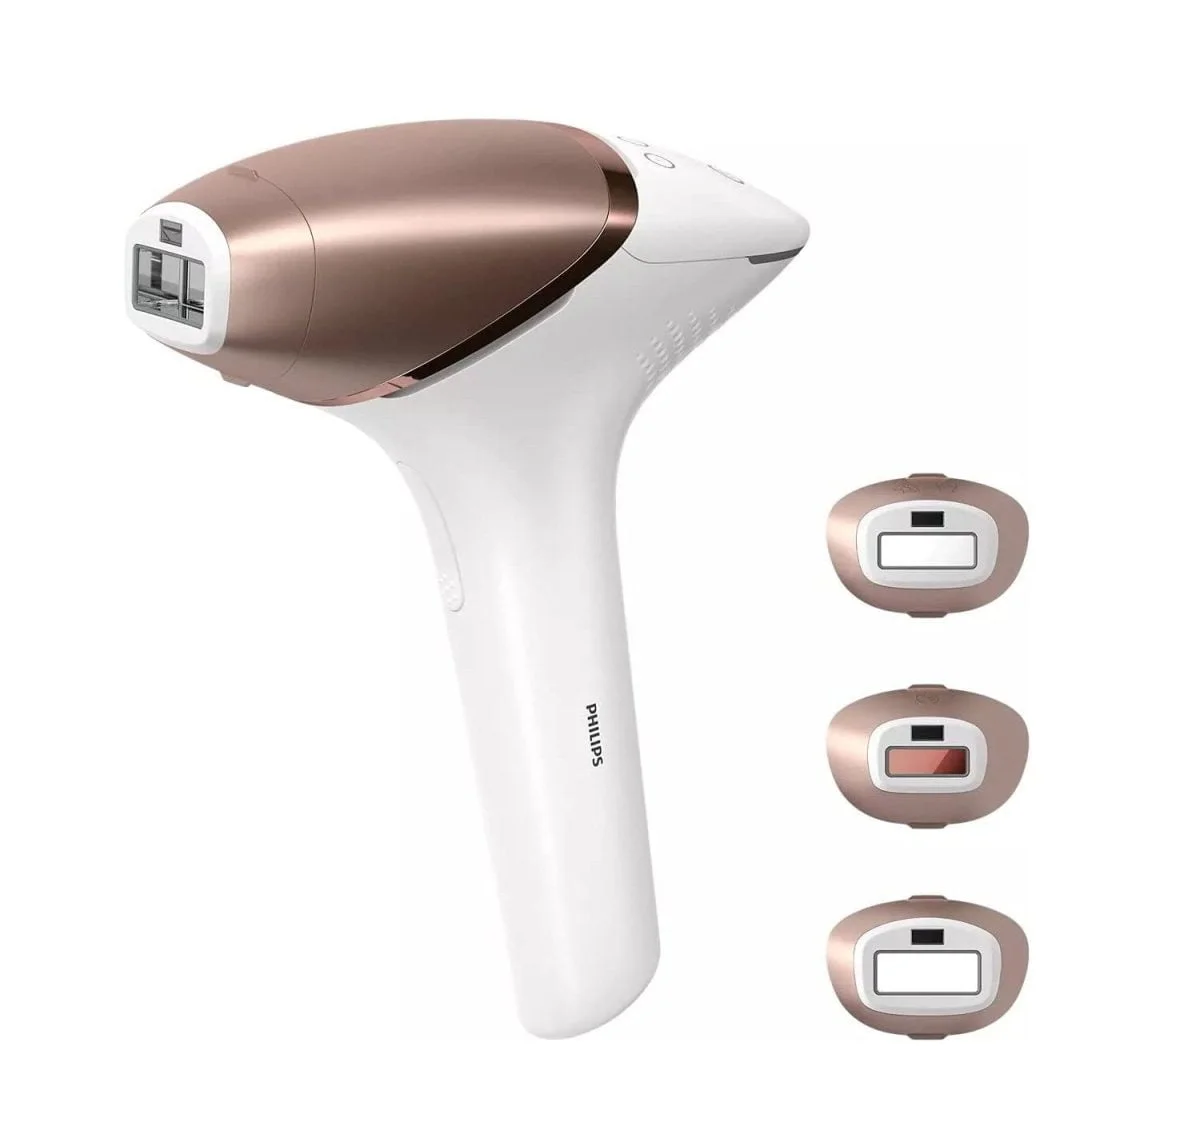 51Tusegmpws. Ac Sl1250 Philips &Amp;Lt;H1&Amp;Gt;Philips Bri955,Philips Lumea Ipl 9000 Series Hair Removal Device - Bri955/60, White&Amp;Lt;/H1&Amp;Gt; &Amp;Lt;Ul Class=&Amp;Quot;A-Unordered-List A-Vertical A-Spacing-Mini&Amp;Quot;&Amp;Gt; &Amp;Lt;Li&Amp;Gt;&Amp;Lt;Span Class=&Amp;Quot;A-List-Item&Amp;Quot;&Amp;Gt; Ipl Technology For Home Use, Developed With Dermatologists &Amp;Lt;/Span&Amp;Gt;&Amp;Lt;/Li&Amp;Gt; &Amp;Lt;Li&Amp;Gt;&Amp;Lt;Span Class=&Amp;Quot;A-List-Item&Amp;Quot;&Amp;Gt; Senseiq Technology For Personalized Hair Removal &Amp;Lt;/Span&Amp;Gt;&Amp;Lt;/Li&Amp;Gt; &Amp;Lt;Li&Amp;Gt;&Amp;Lt;Span Class=&Amp;Quot;A-List-Item&Amp;Quot;&Amp;Gt; 450,000 Flashes In Total &Amp;Lt;/Span&Amp;Gt;&Amp;Lt;/Li&Amp;Gt; &Amp;Lt;Li&Amp;Gt;&Amp;Lt;Span Class=&Amp;Quot;A-List-Item&Amp;Quot;&Amp;Gt; Intelligent Attachments Adapt Programs For Each Body Area &Amp;Lt;/Span&Amp;Gt;&Amp;Lt;/Li&Amp;Gt; &Amp;Lt;Li&Amp;Gt;&Amp;Lt;Span Class=&Amp;Quot;A-List-Item&Amp;Quot;&Amp;Gt; Precision Attachment For Bikini Area And Underarms &Amp;Lt;/Span&Amp;Gt;&Amp;Lt;/Li&Amp;Gt; &Amp;Lt;/Ul&Amp;Gt; Philipis Hair Removal Philips Bri955,Philips Lumea Ipl 9000 Series Hair Removal Device - Bri955/60, White,